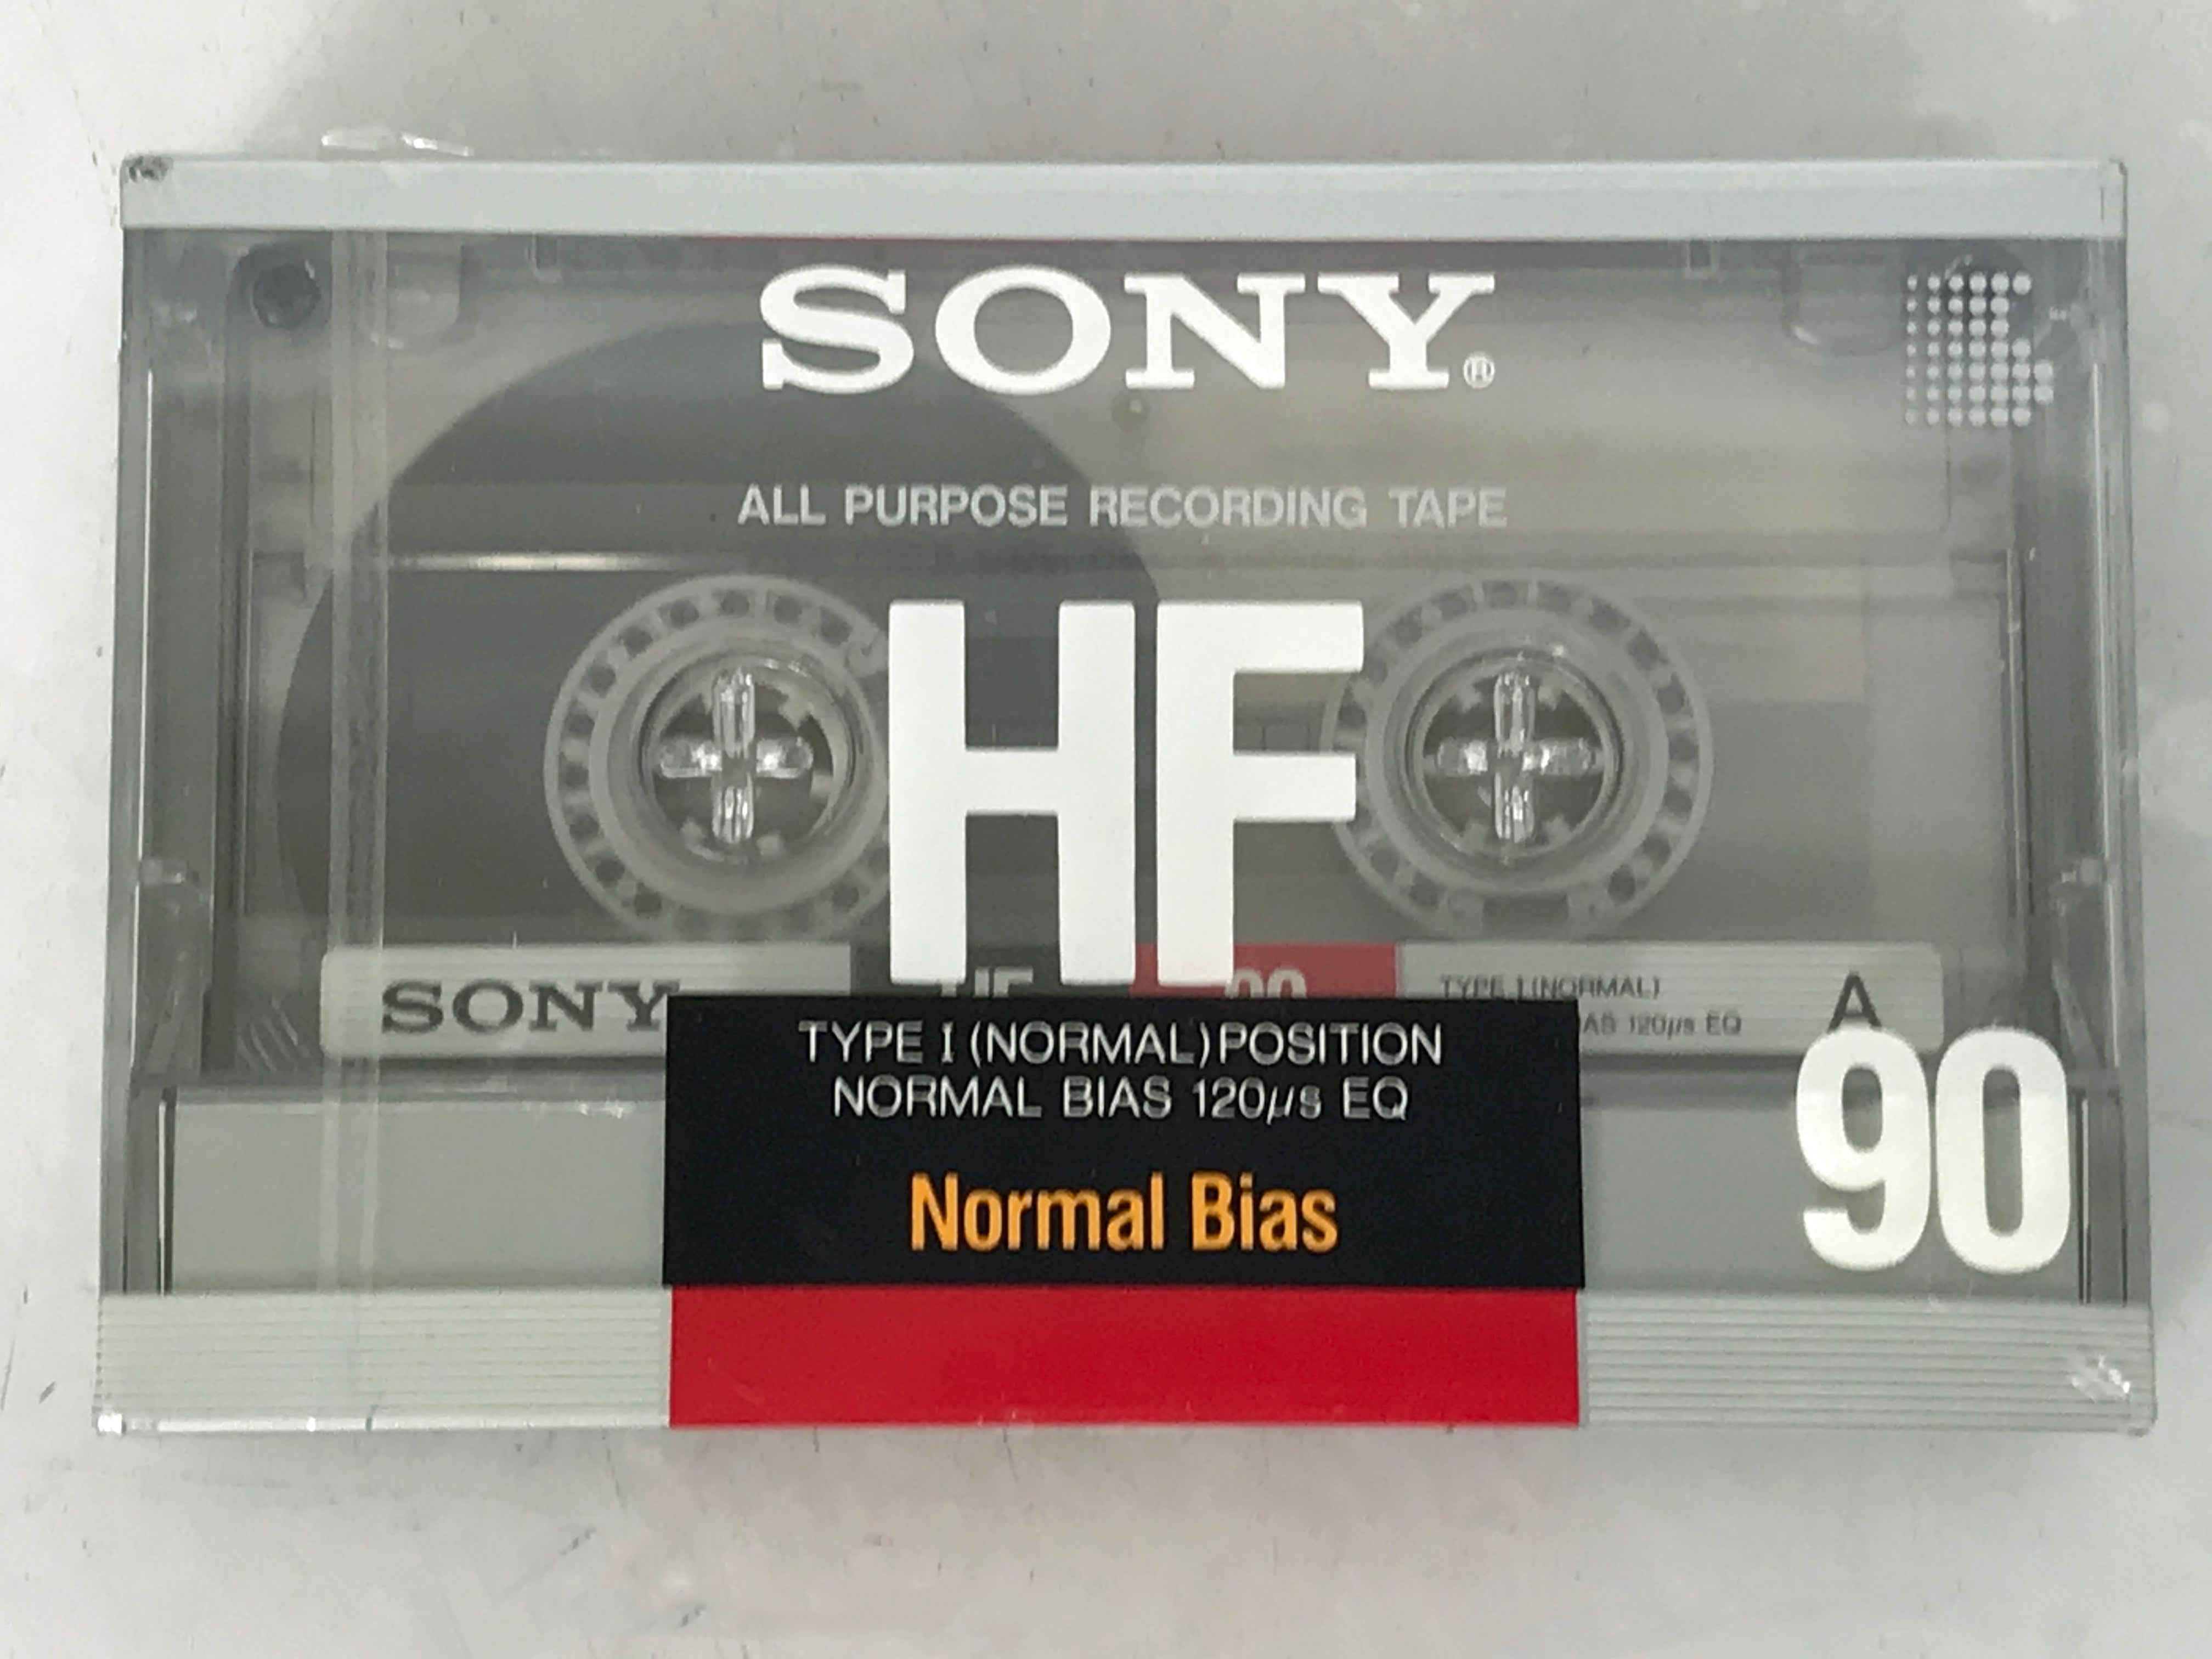 Sony HF 90 Minutes Normal Bias Audio Cassette Tape